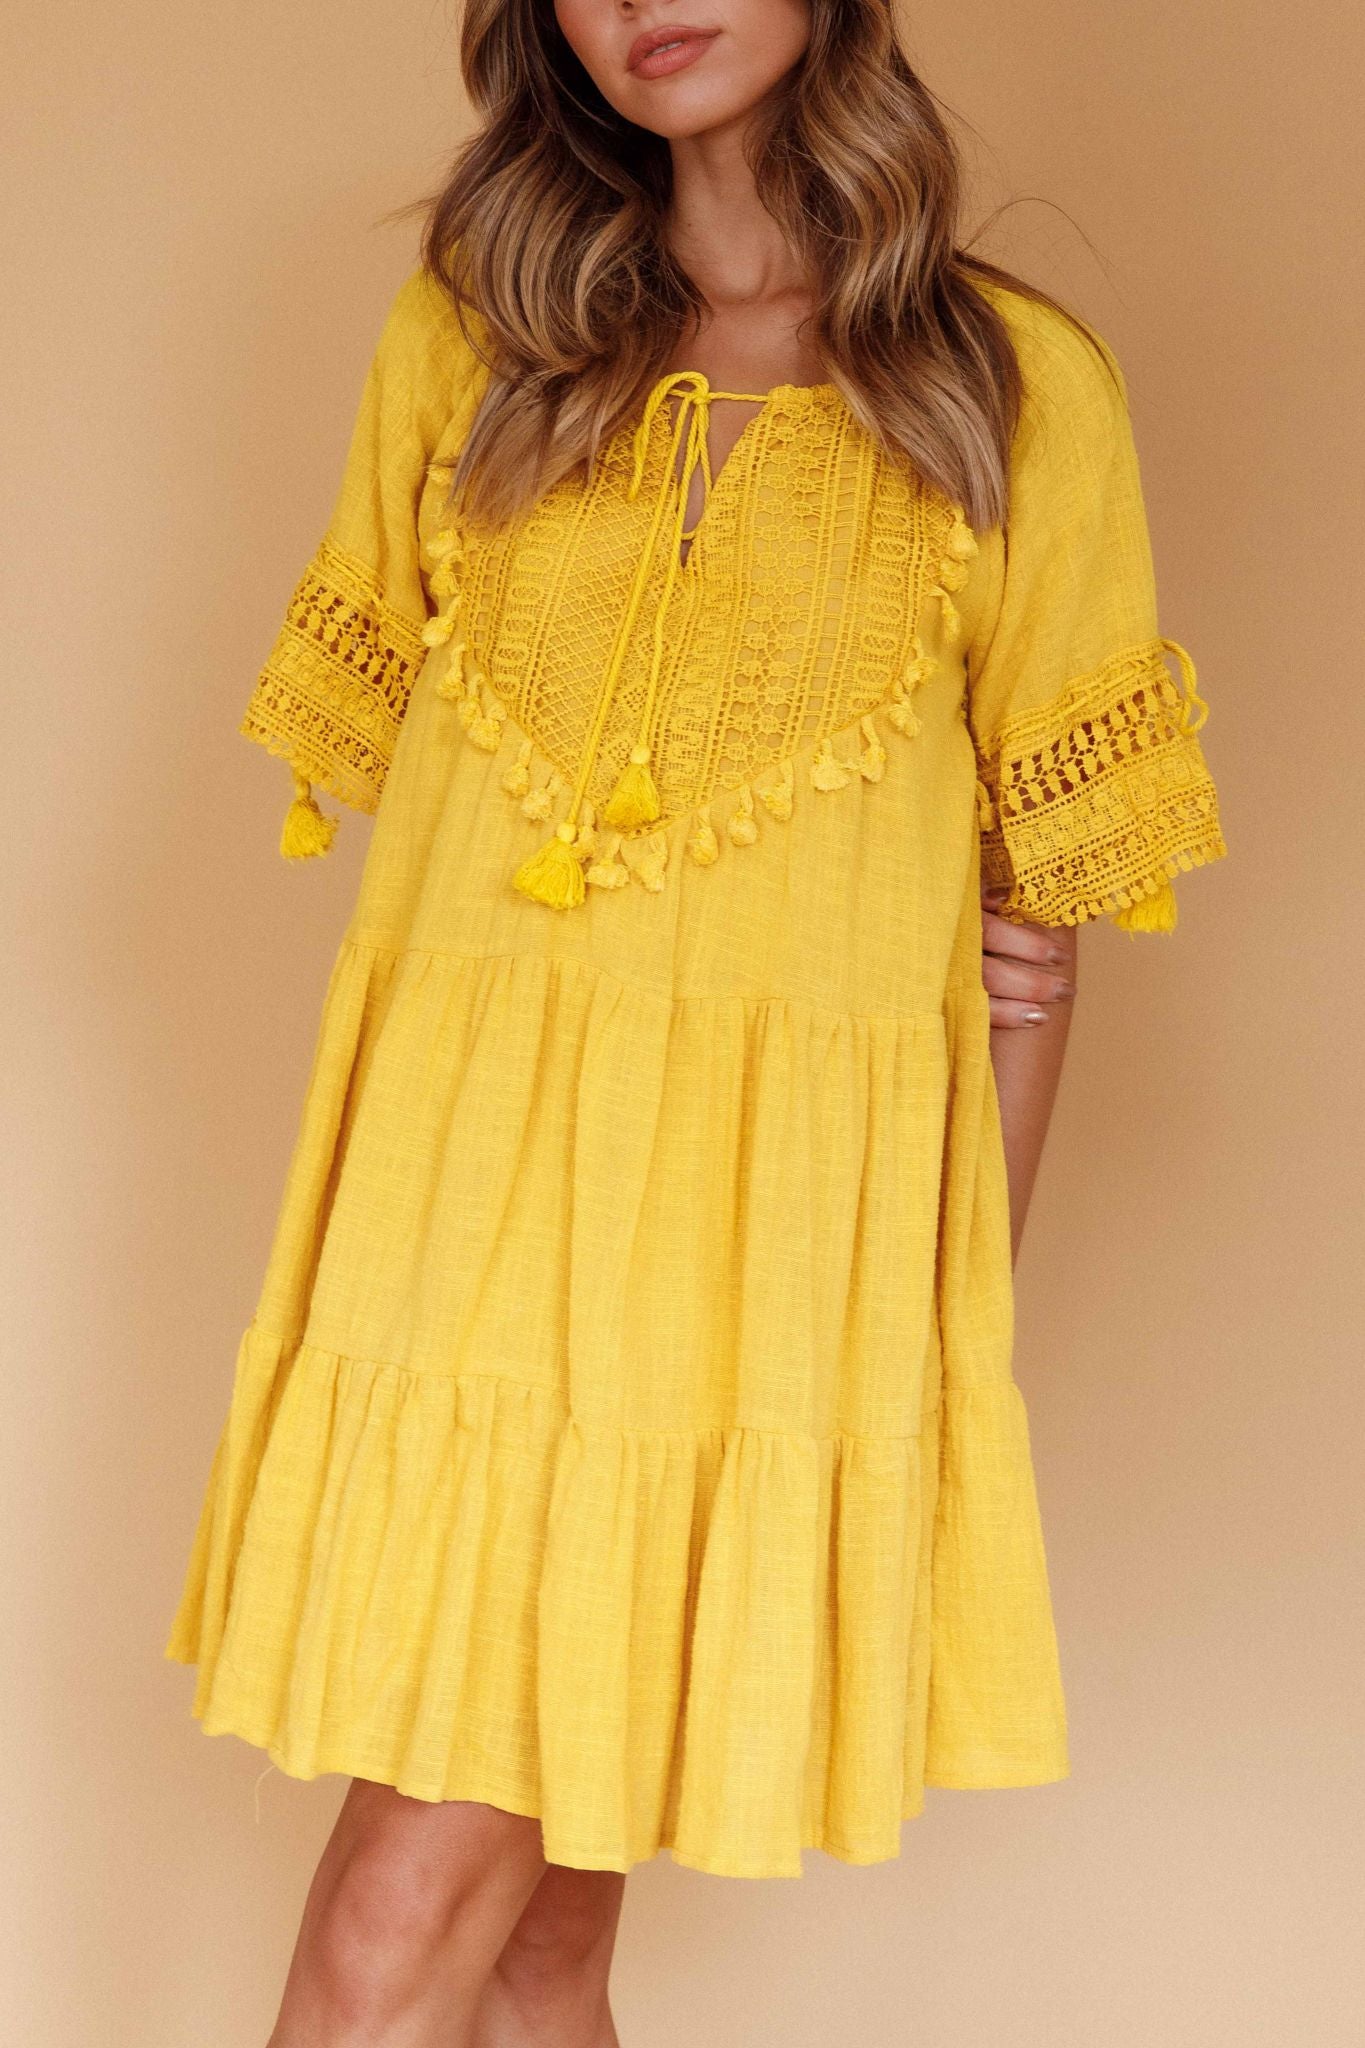 "Turn heads in our yellow midi dress! Effortless elegance for any occasion."